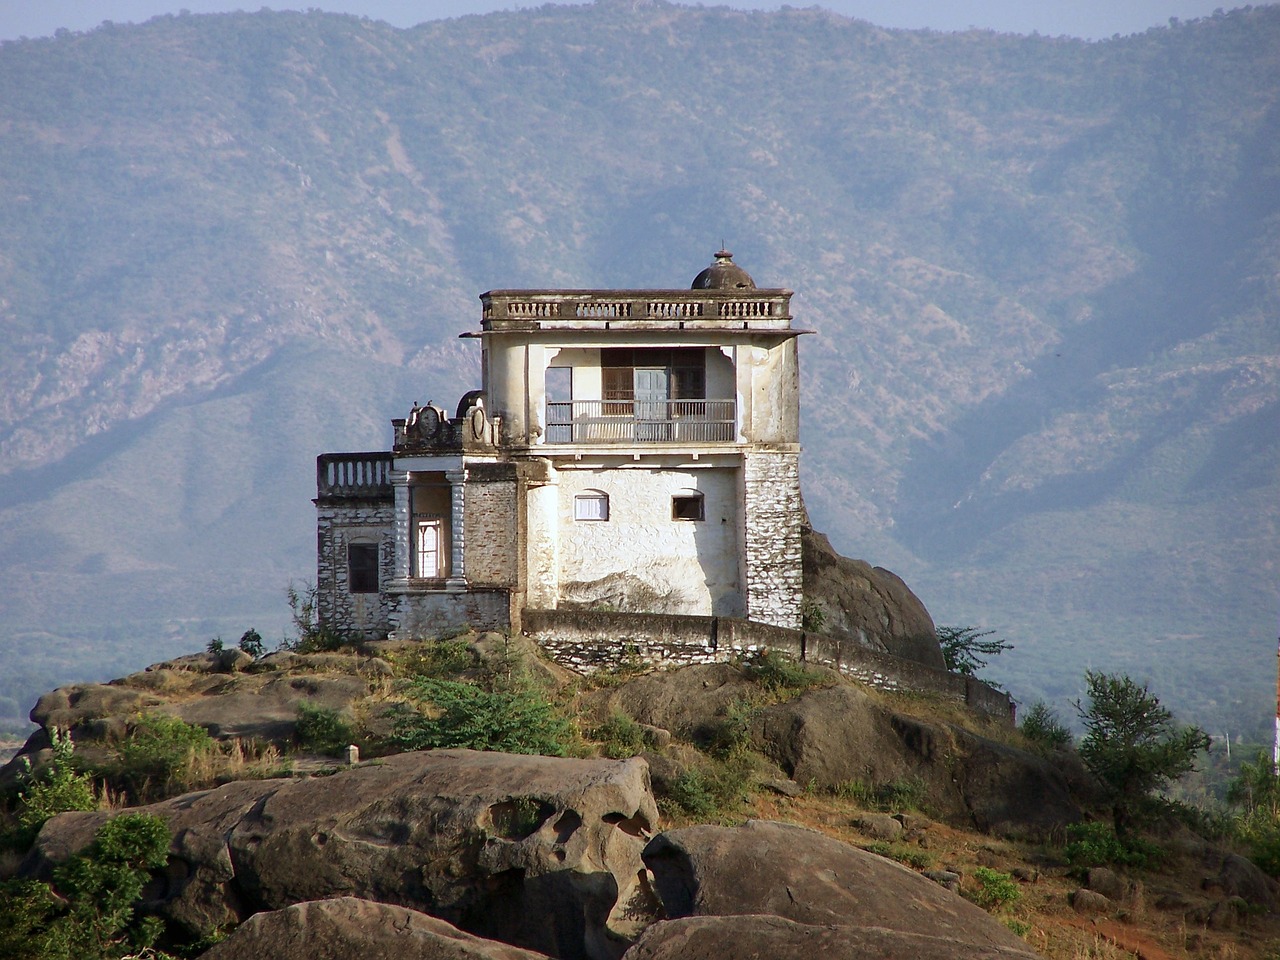 Cultural Delights and Scenic Views in Mount Abu